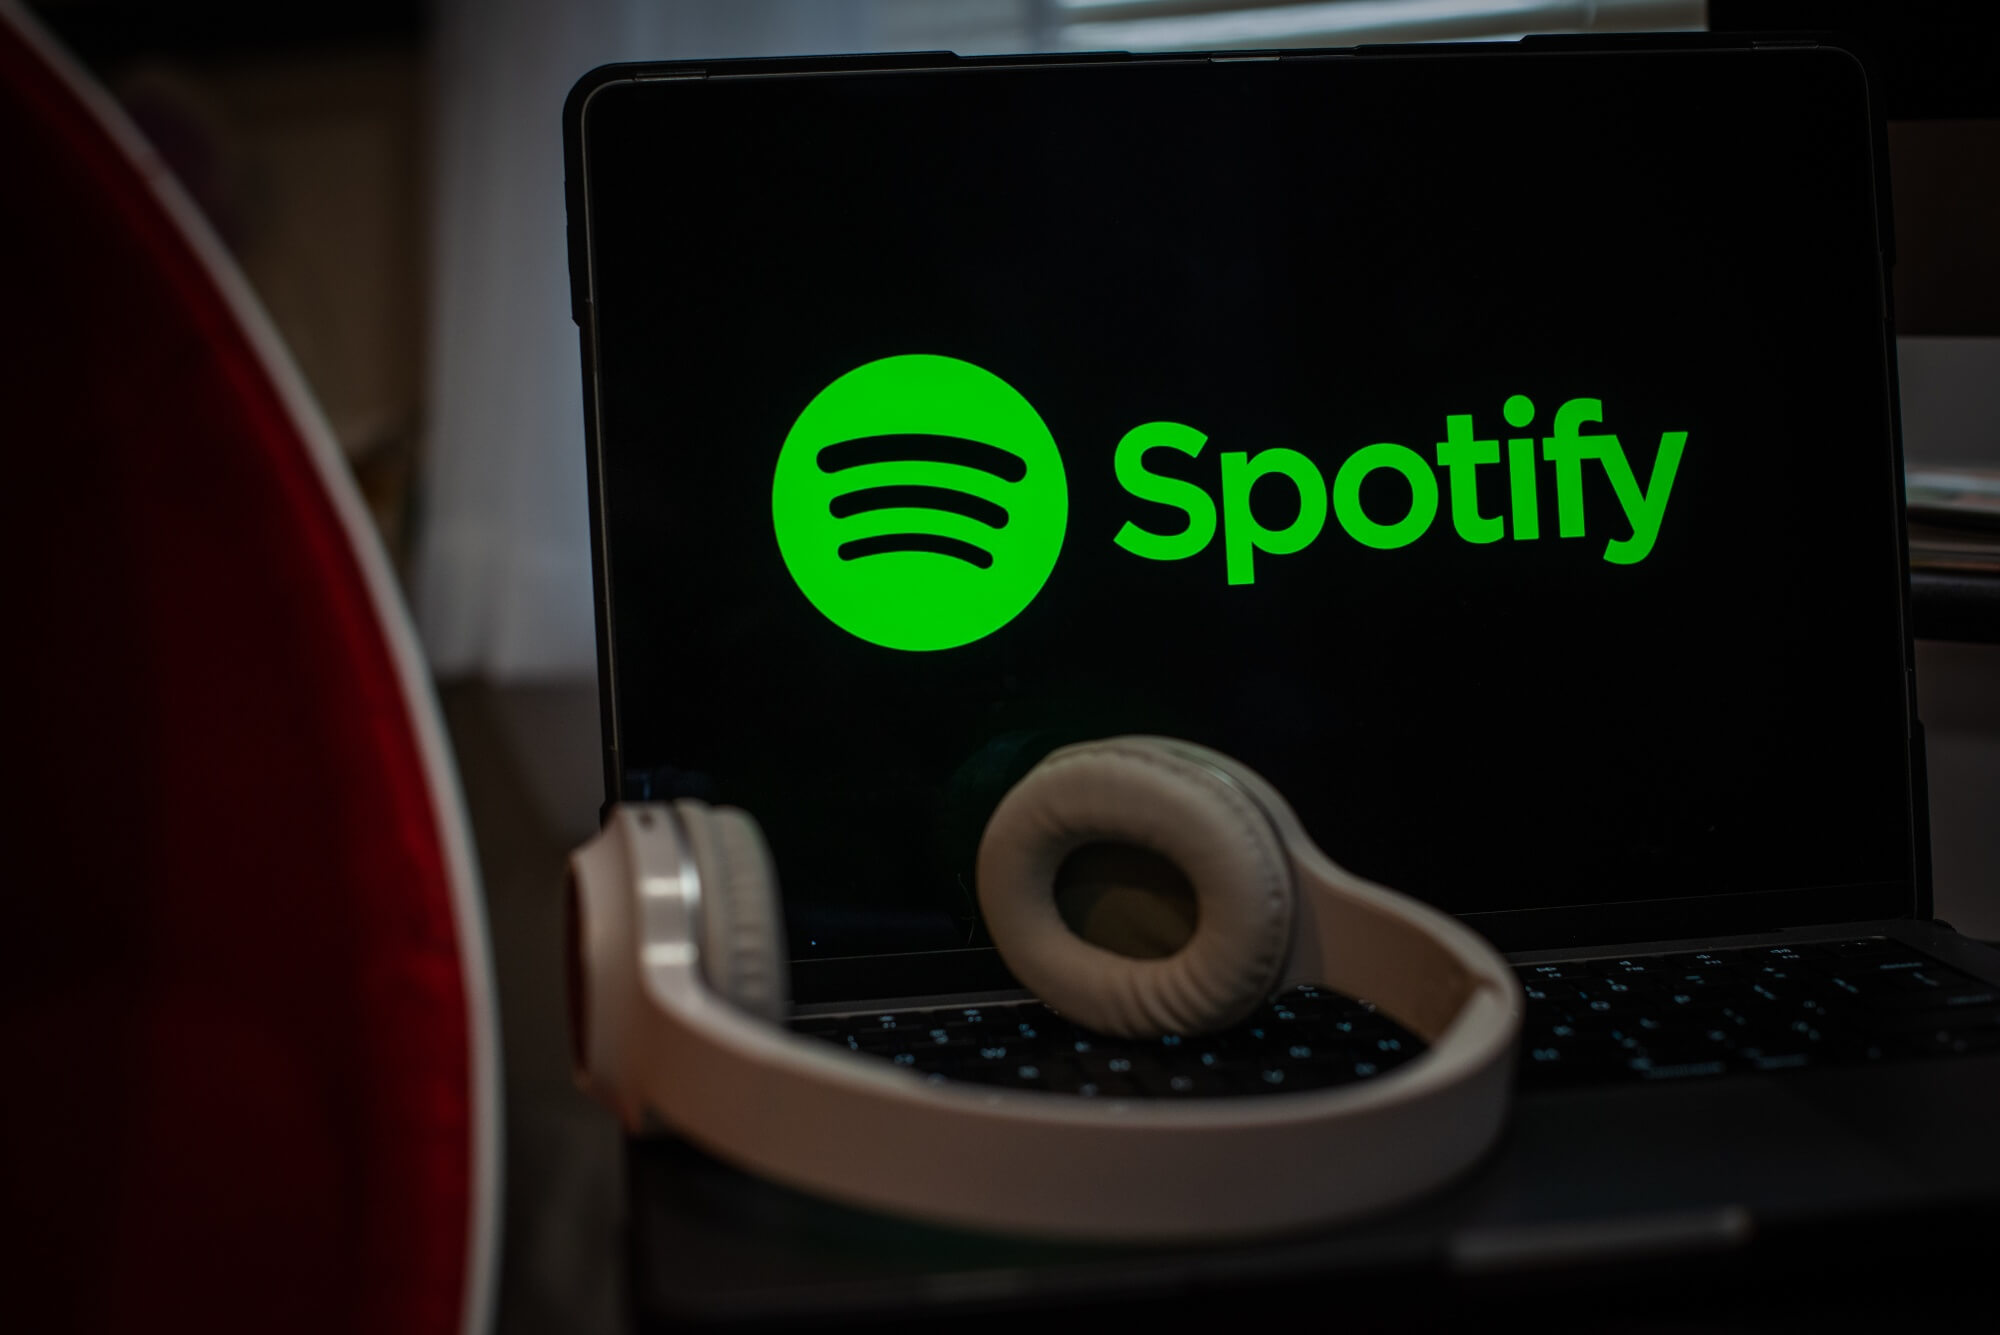 Spotify raises prices in the U.S. with plans to invest in its other services